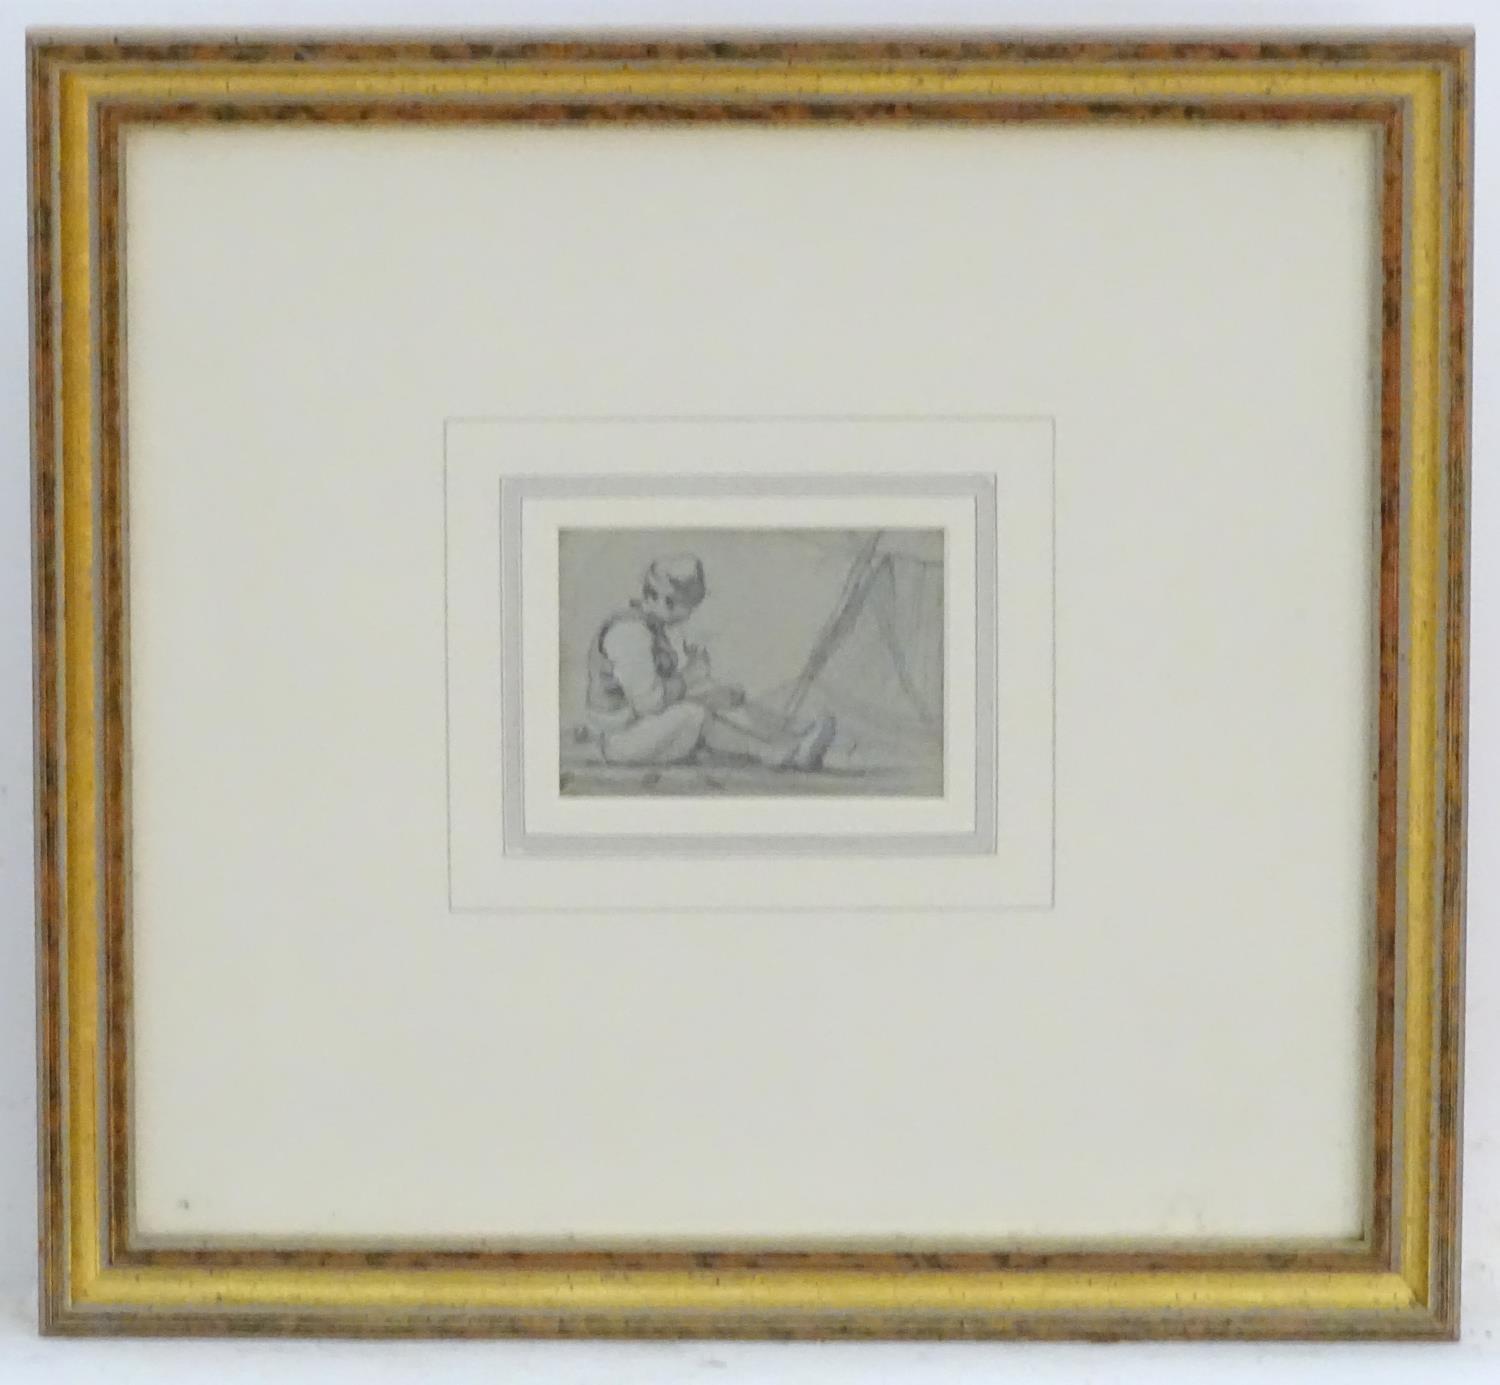 XIX-XX, Pencil on paper, A sketch of a seated man smoking a pipe whilst mending fishing nets. - Image 3 of 3